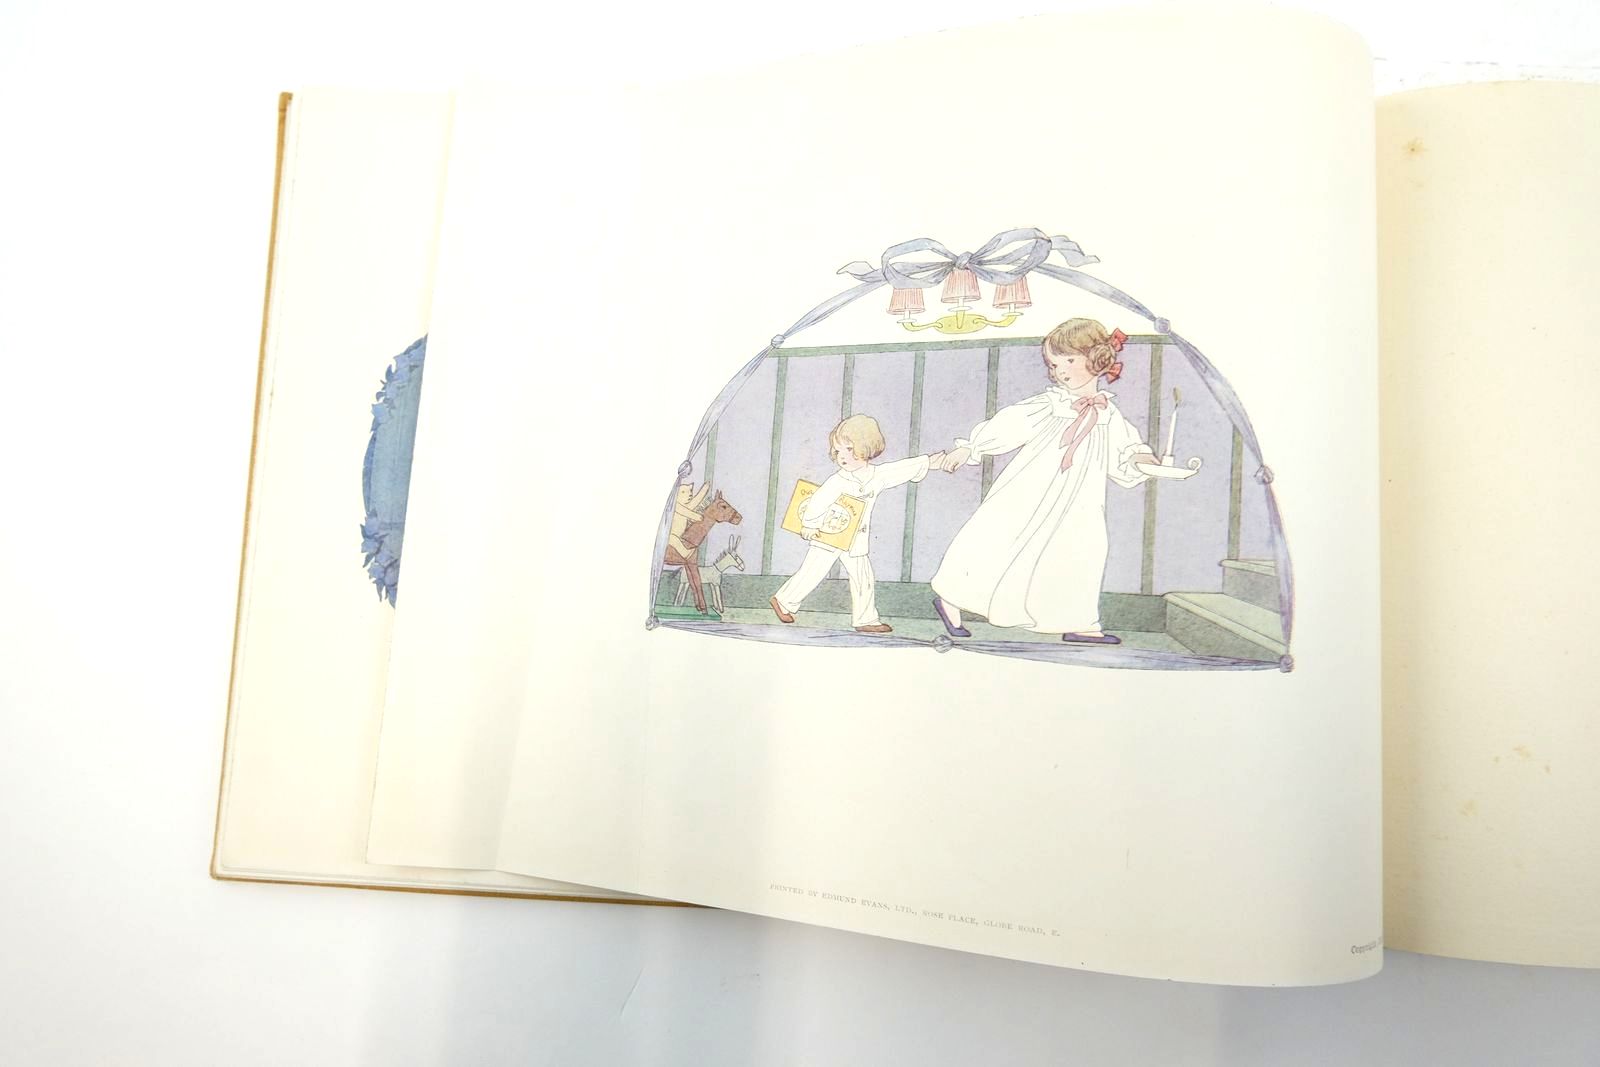 Photo of LITTLE SONGS OF LONG AGO written by Moffat, Alfred illustrated by Willebeek Le Mair, Henriette published by Augener Ltd. (STOCK CODE: 2140887)  for sale by Stella & Rose's Books